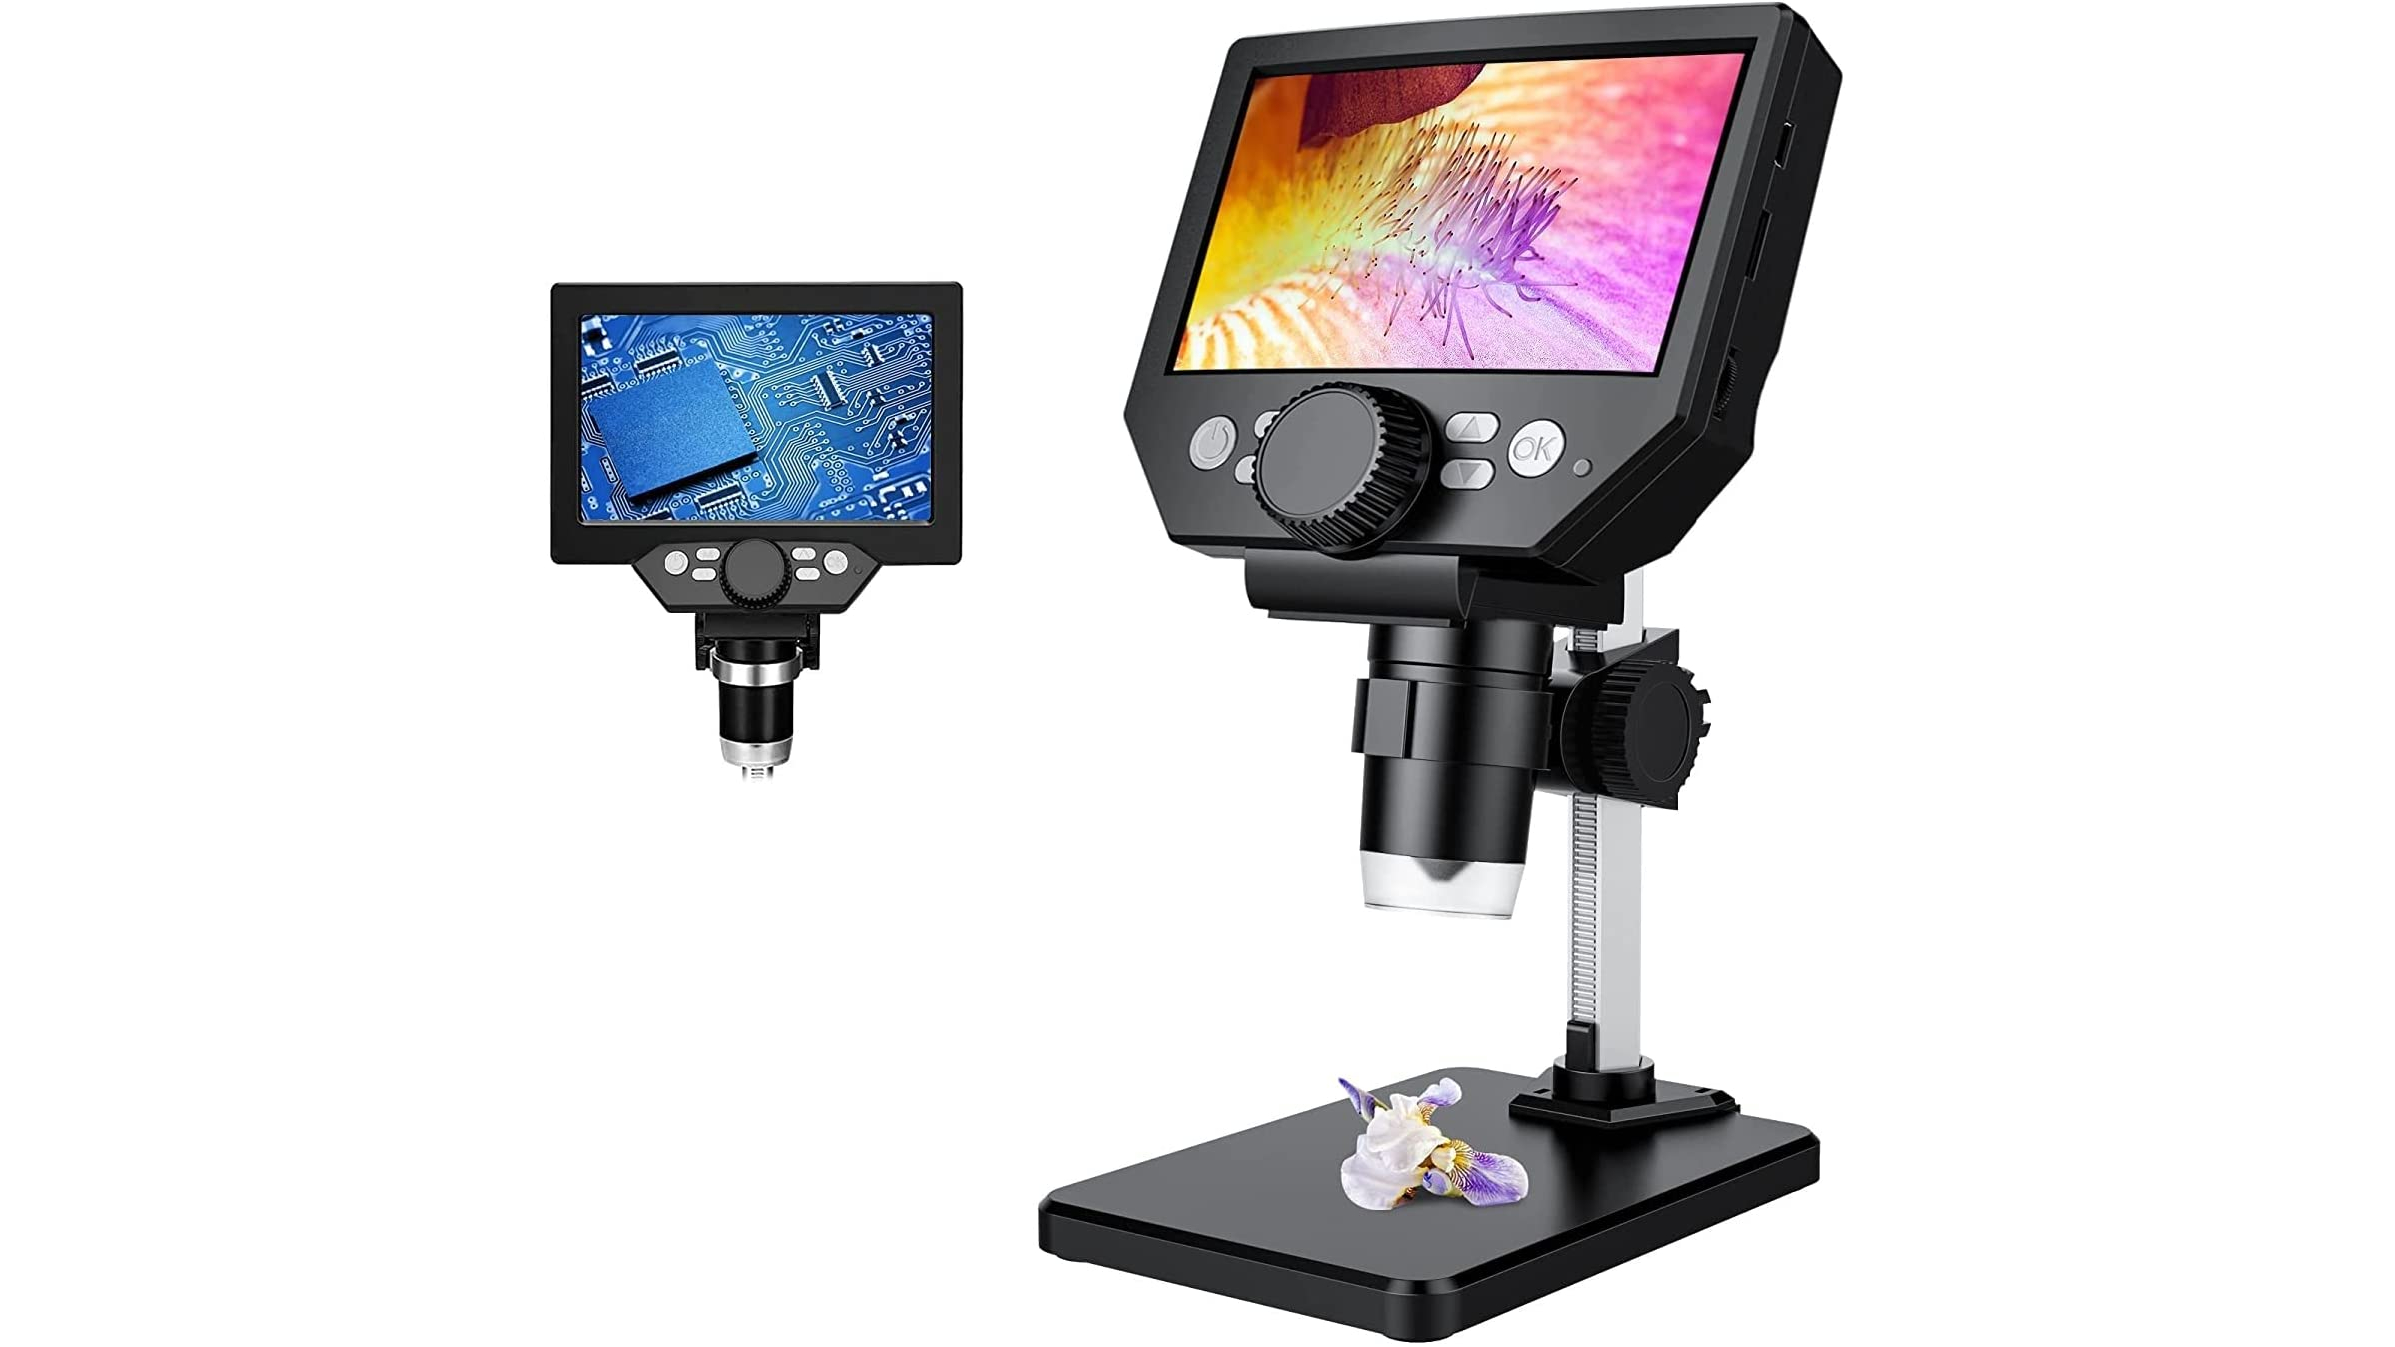 Camera Video Recorder for Lab Edu Naturalist 4.3 inch LCD Digital Microscope 1000X Magnification USB Microscope Magnifier with 8 Adjustable LED Light Micro-SD Storage, Rechargeable Lithium Battery 